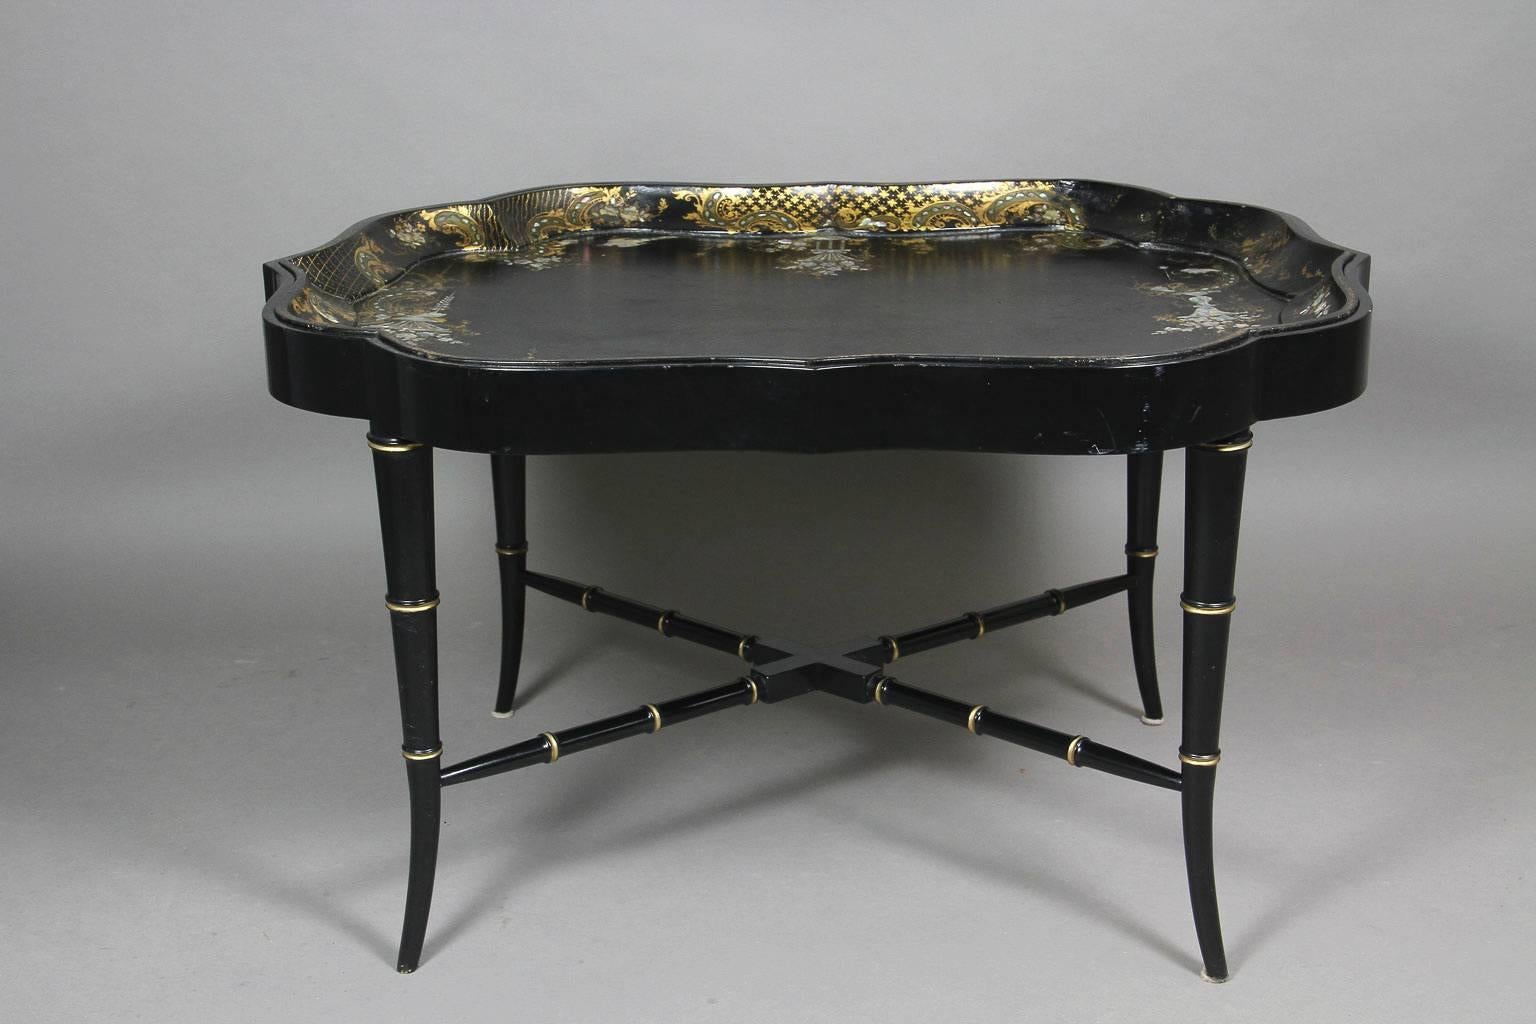 Shaped scallop tray decorated with urns and scrolls, flowers, ebonized base with faux bamboo legs and X form stretcher. Ex Rockefeller, Taubman collection.